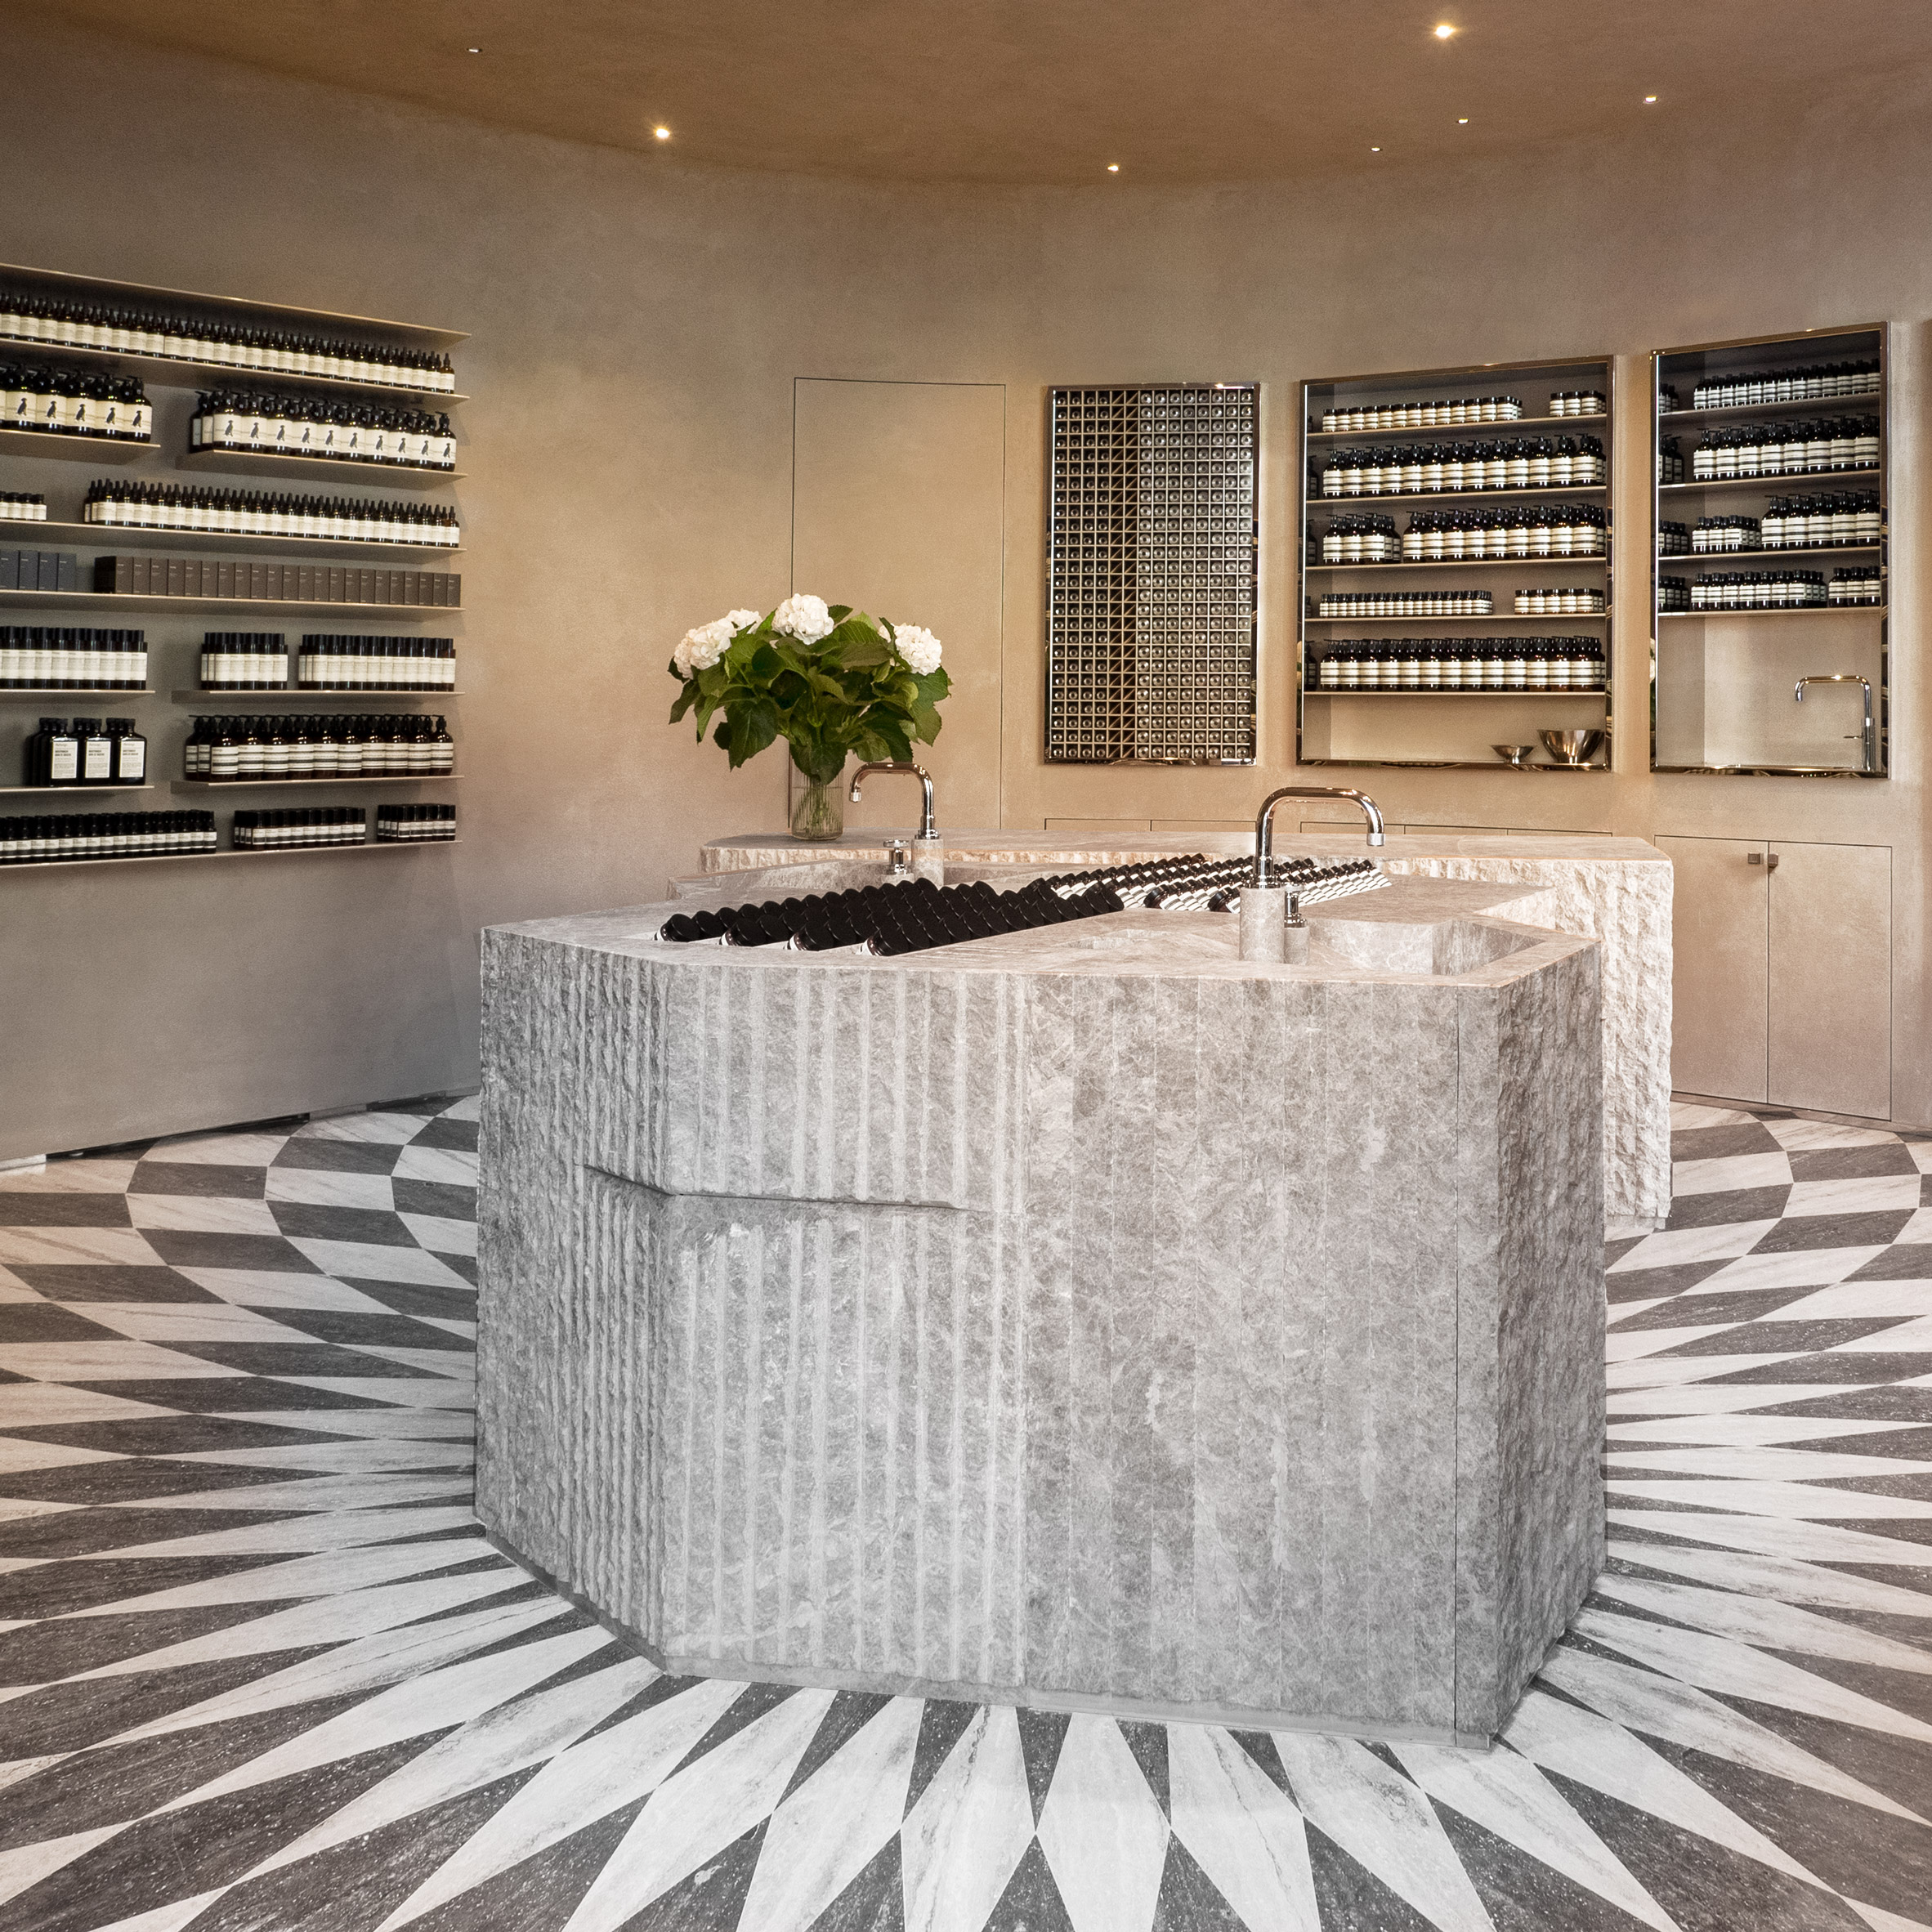 Top architecture and design roles: Store design/project coordinator at Aesop in New York, USA